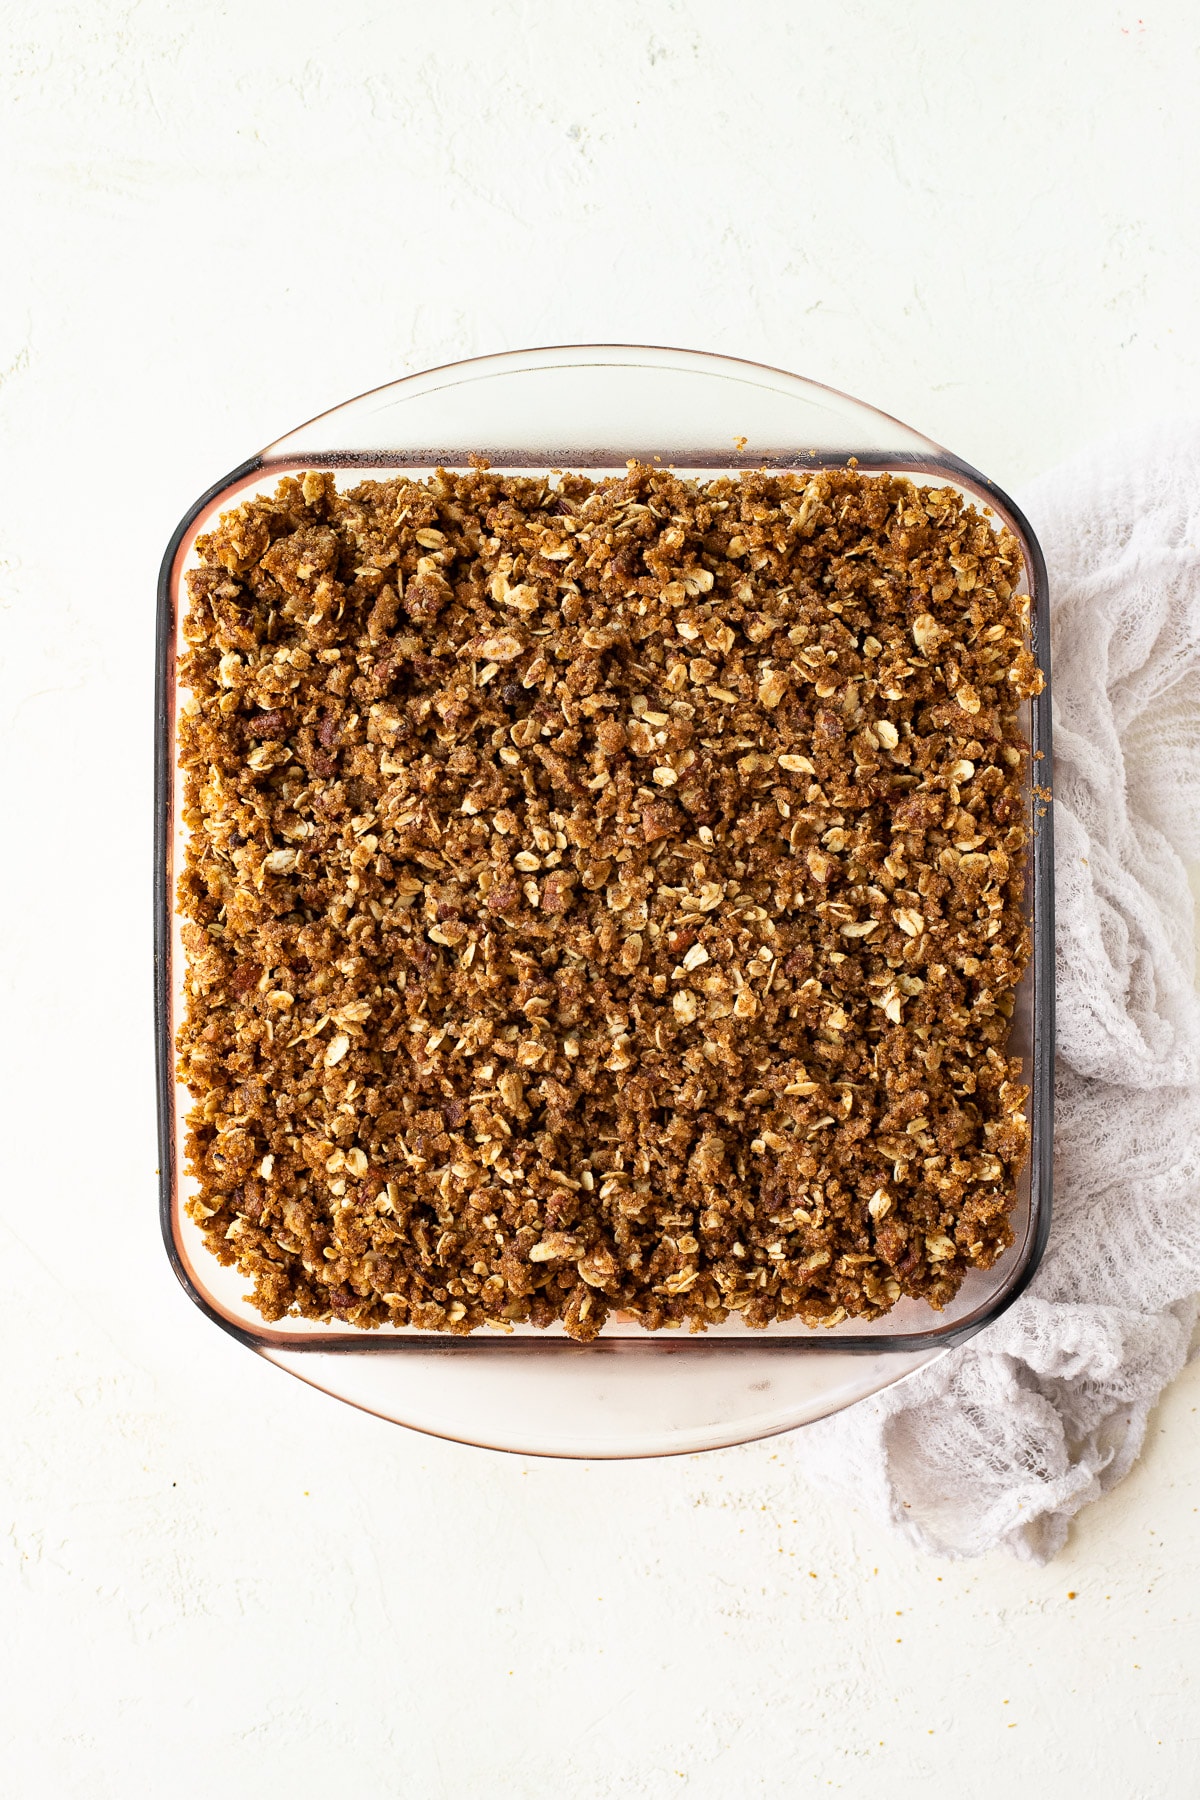 A square baking dish filled with fruit and covered with crumble topping.